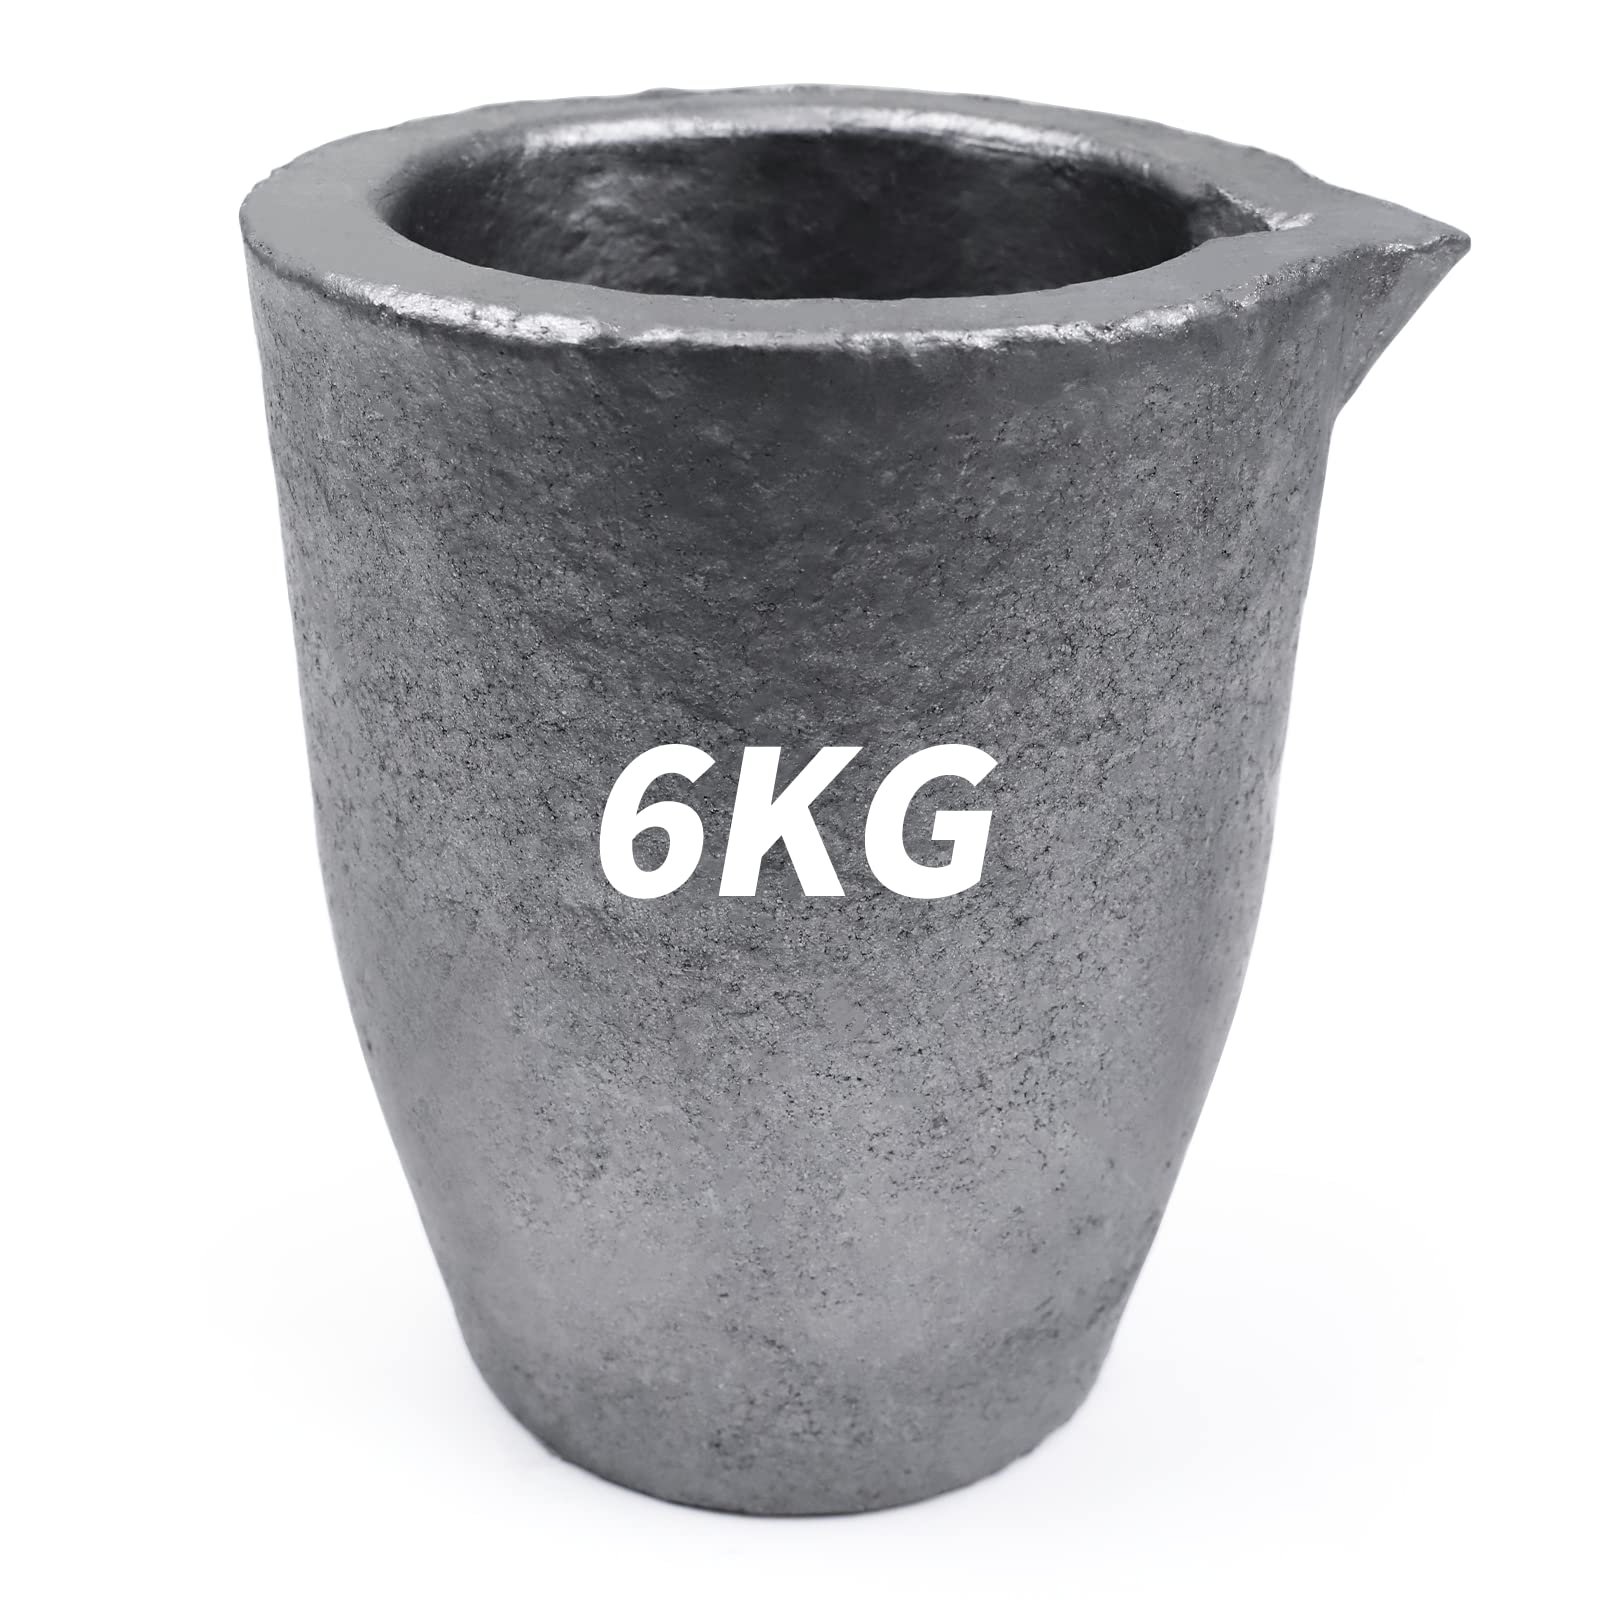 TOAUTO 6 KG Foundry Clay Graphite Crucible for Metal Melting Casting  Refining Gold Silver Copper Brass Aluminum 6KG